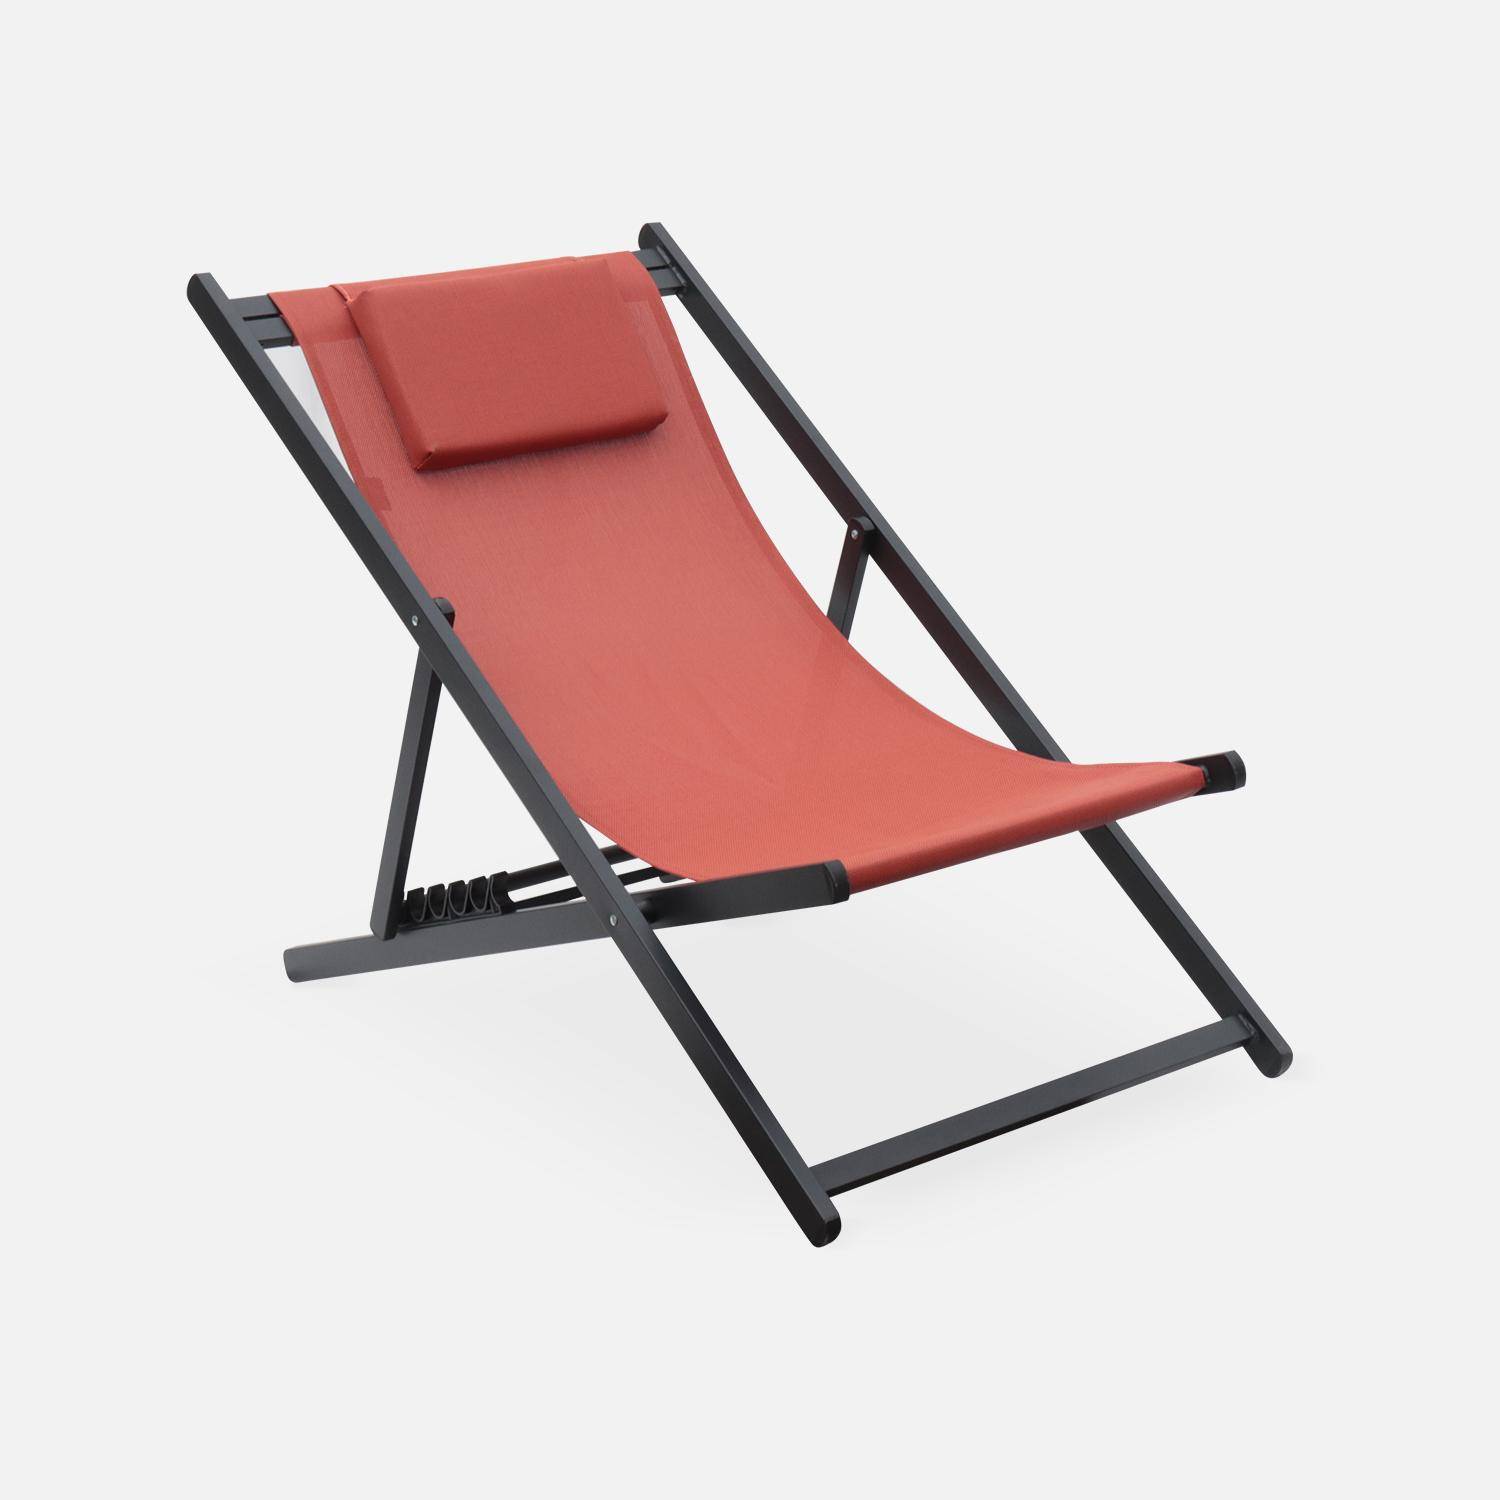 Set of 2 sun loungers - adjustable deck chairs with headrests made from aluminium frame - Gaia - Anthracite frame, Terracotta textilene Photo3